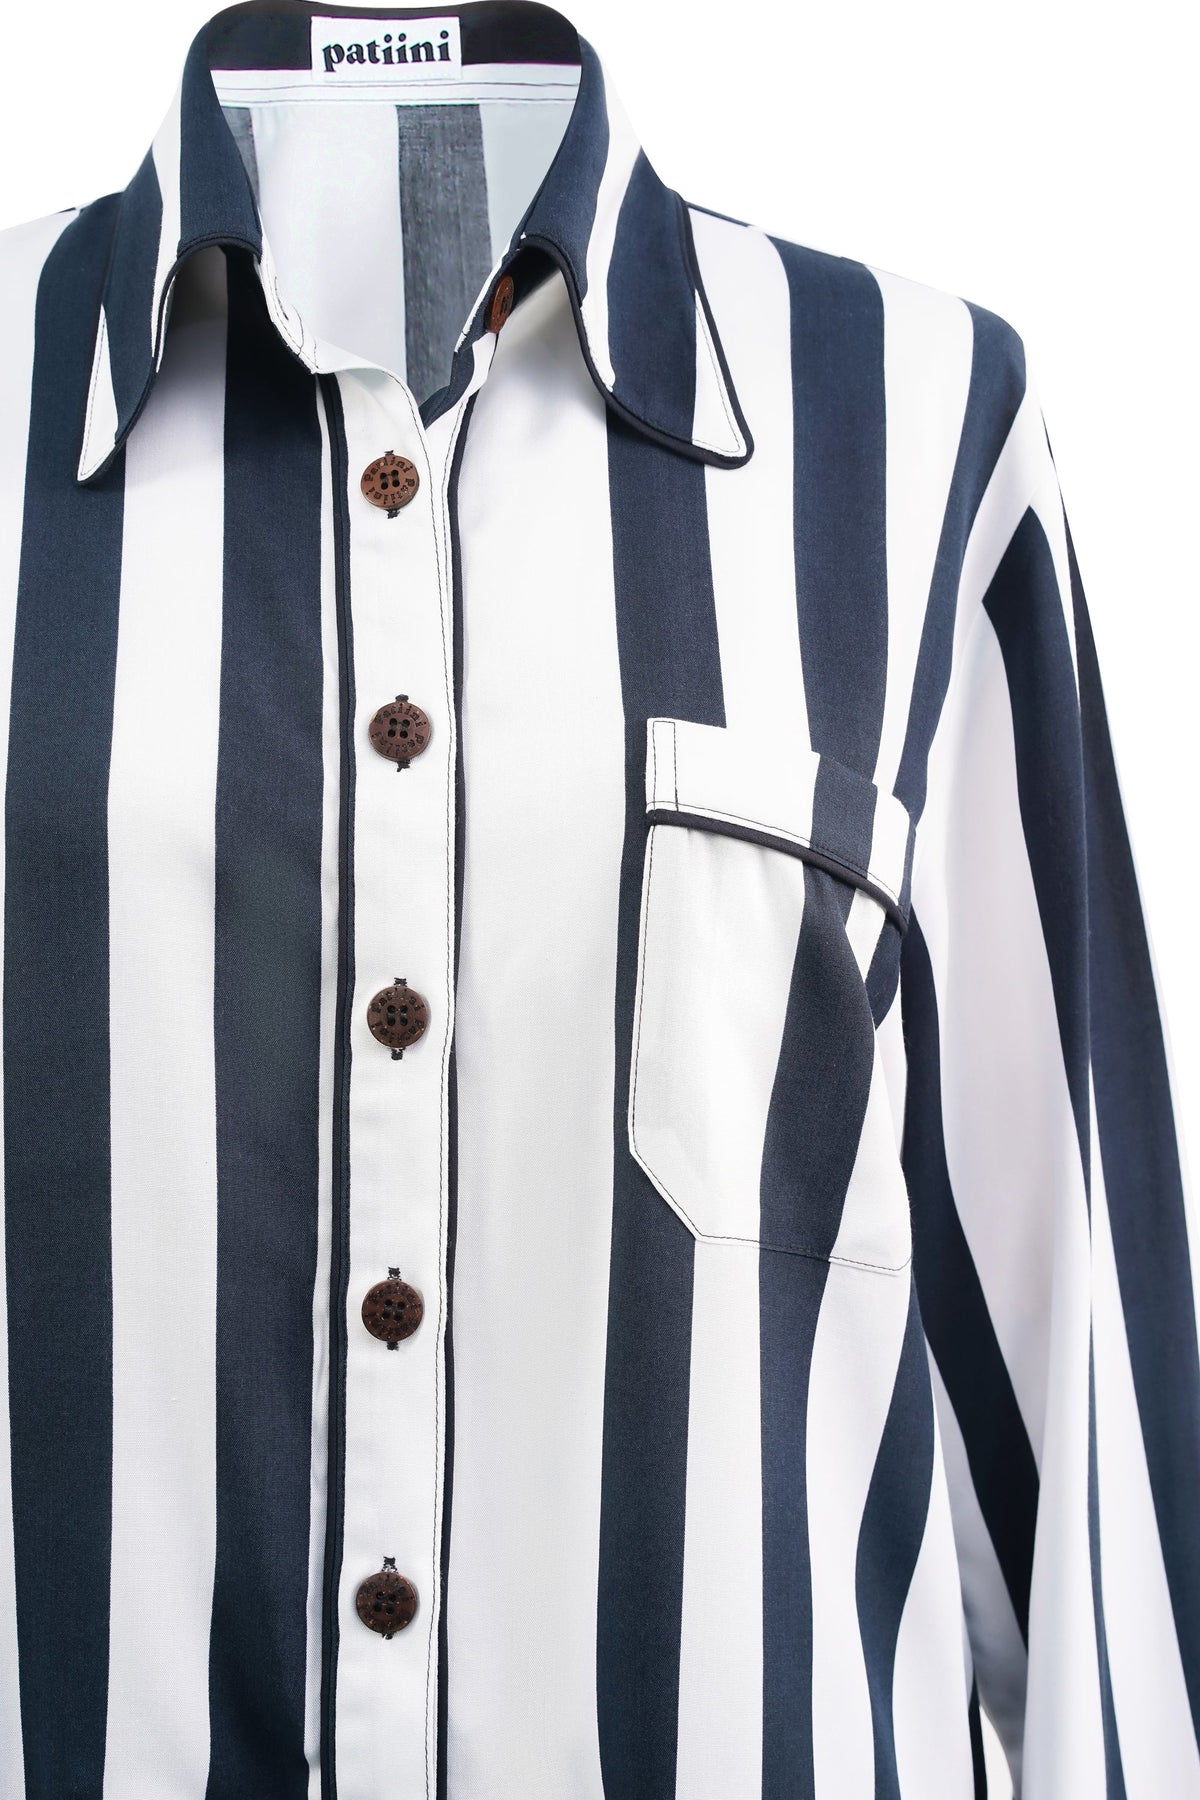 Close-up of a black and white striped long-sleeve shirt with coconut shell buttons.